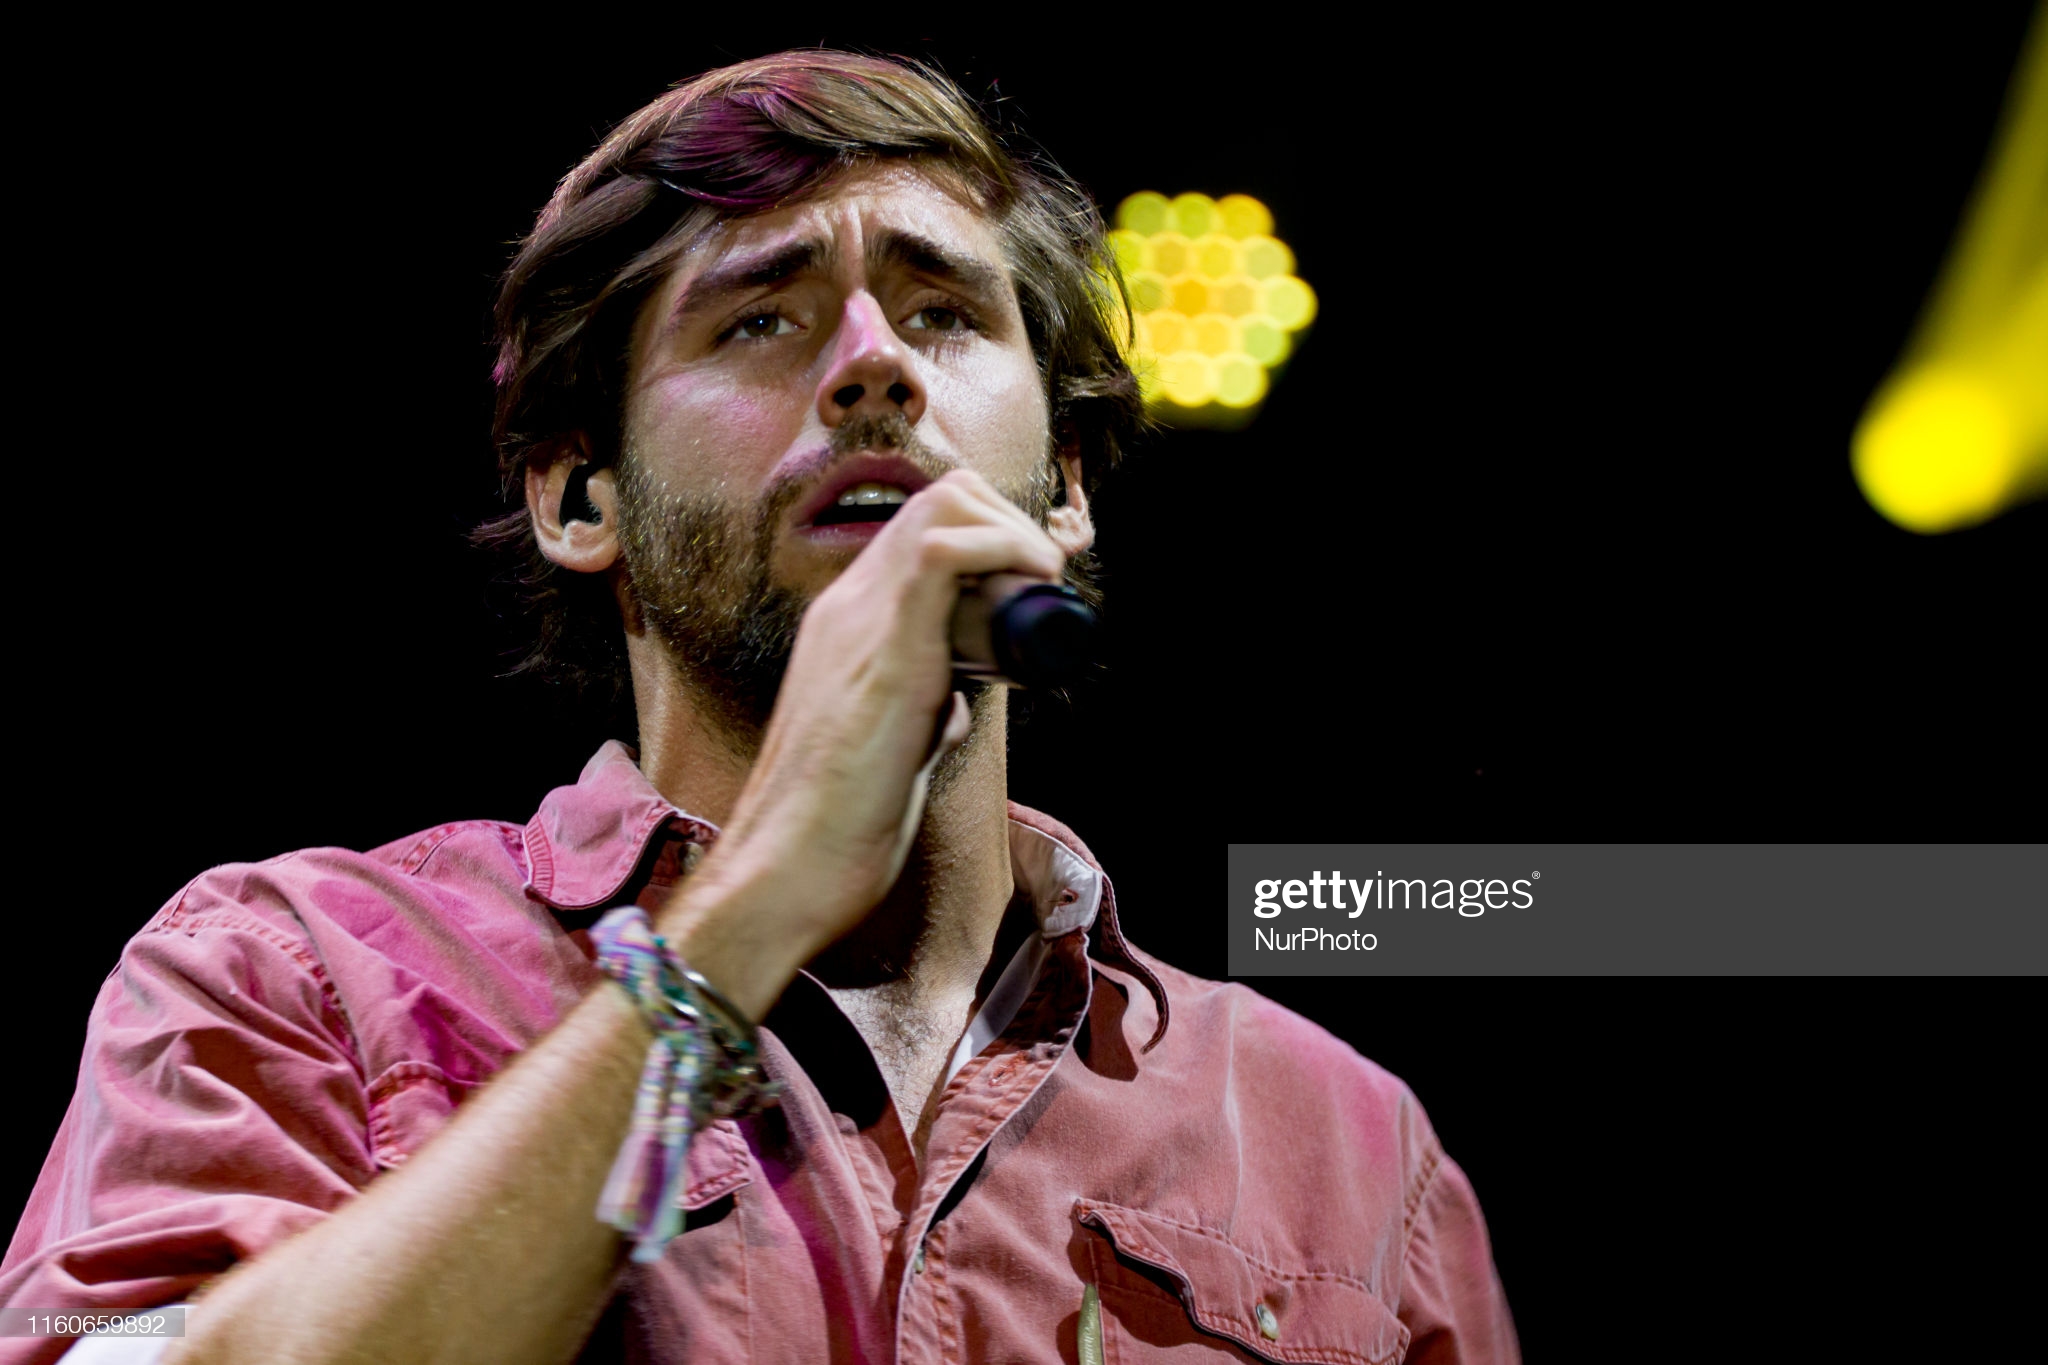 Alvaro Soler Biography; Age, Songs, Girlfriend And Parents